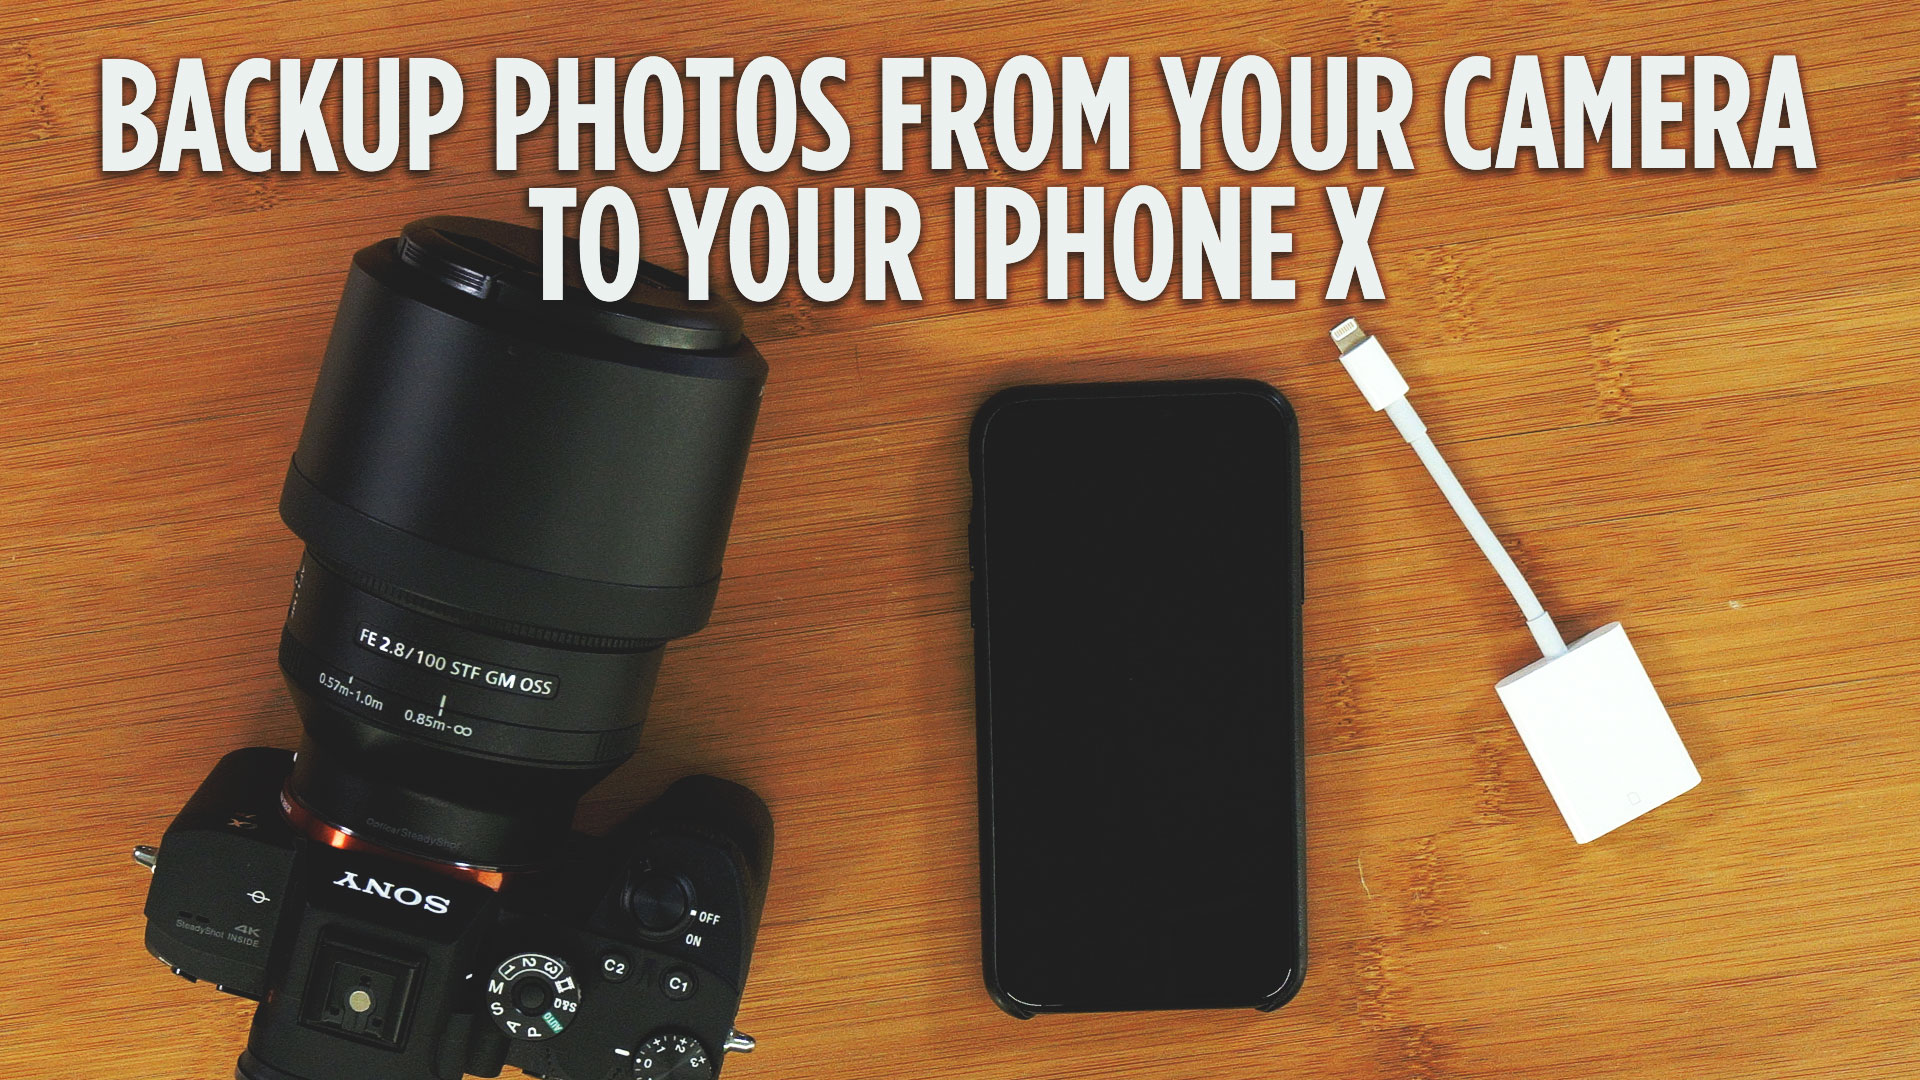 How to Backup Photos from Your Camera to Your iPhone